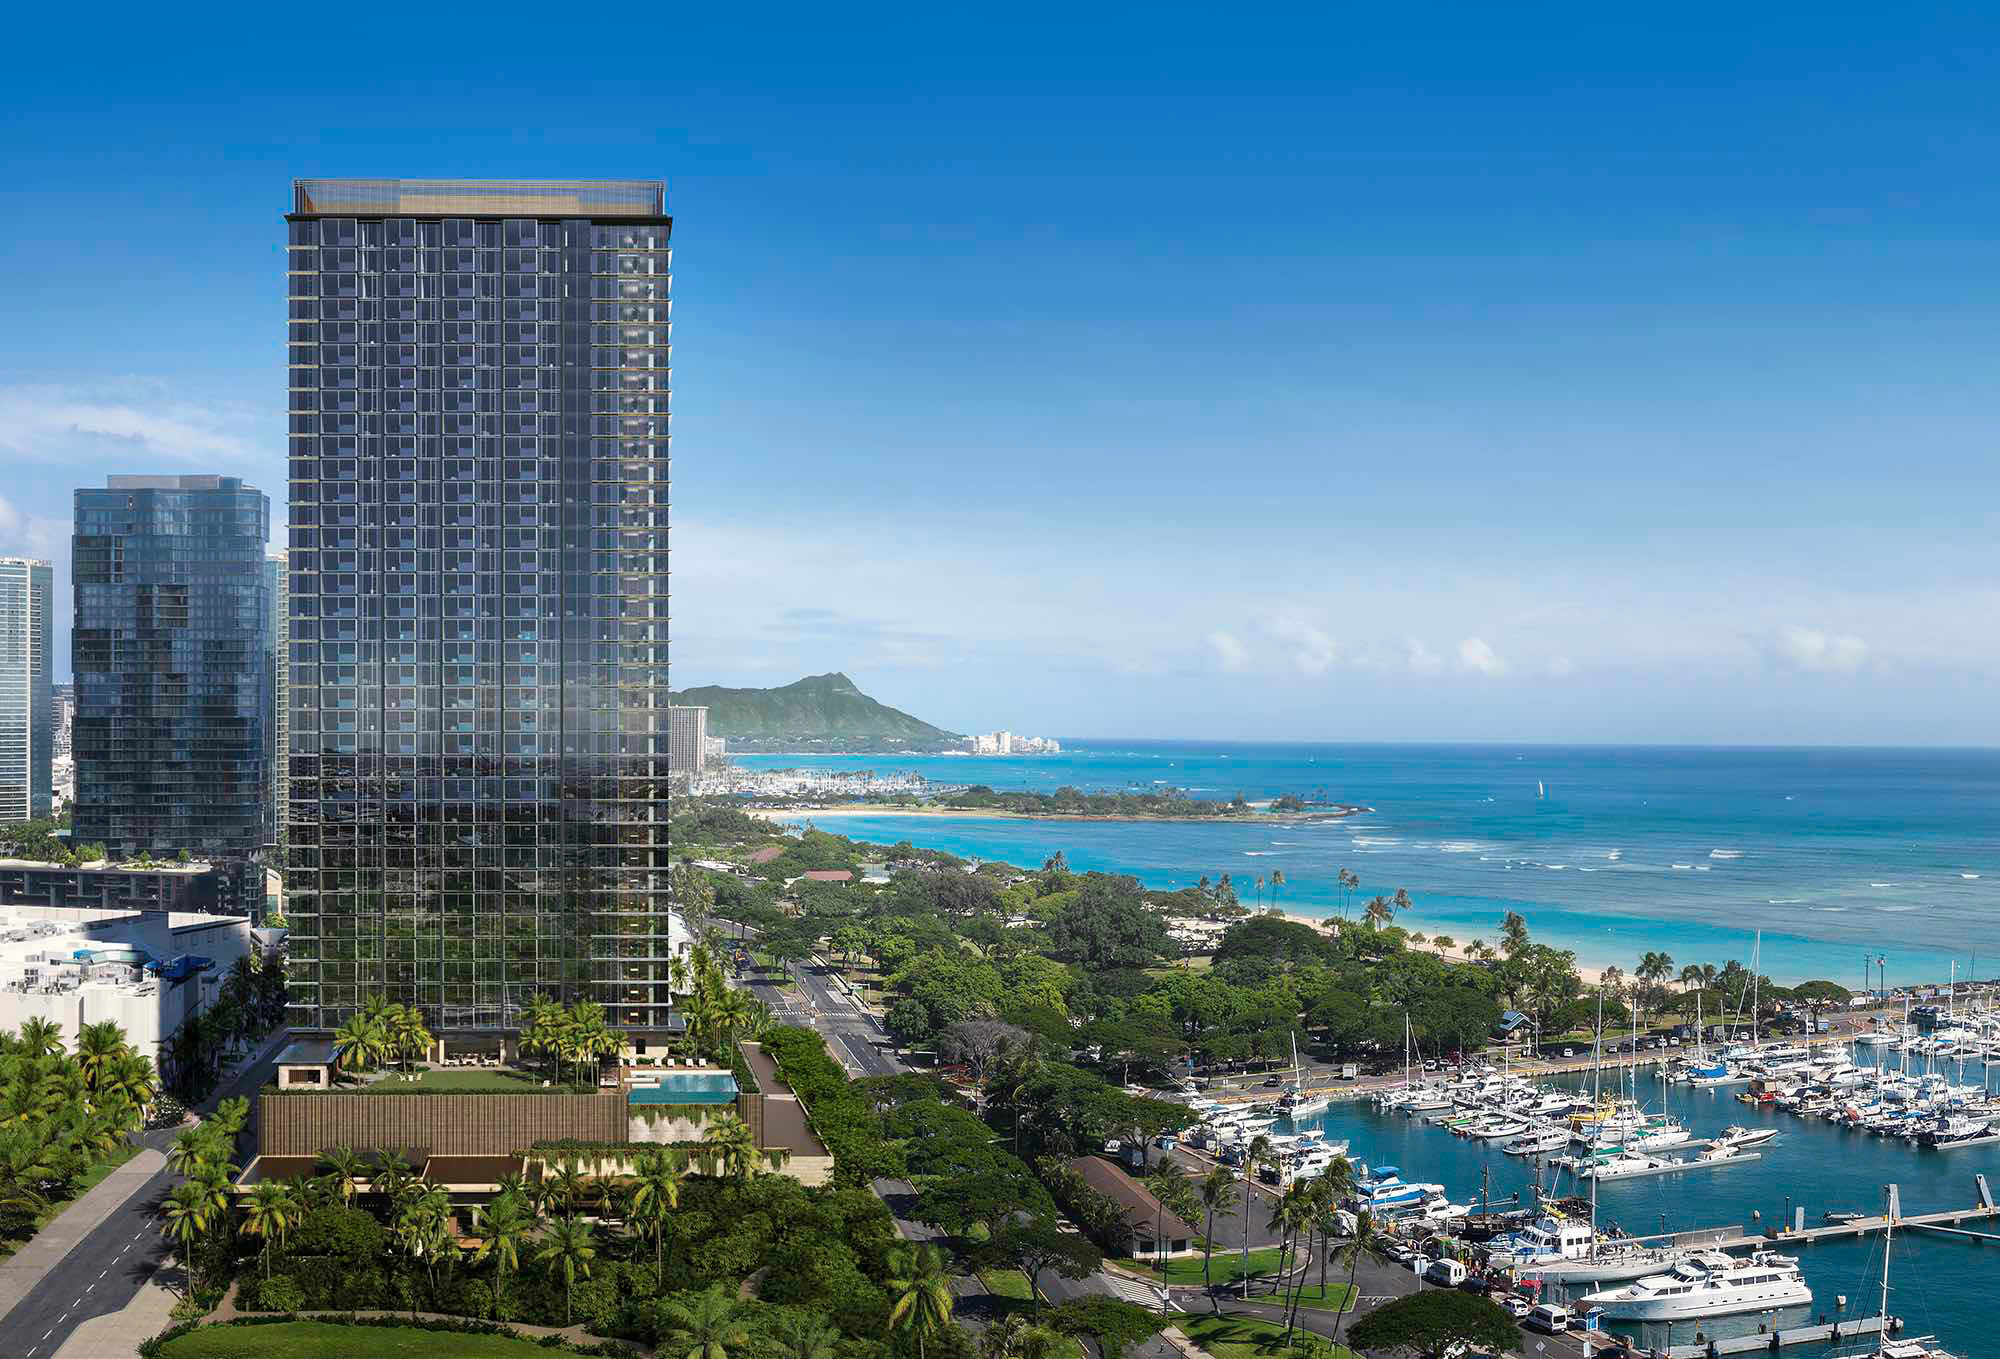 Aerial image of Victoria Place tower overlooking Kewalo Harbor, Ala Moana Beach Park, and Magic Island, with Waikiki and Diamond Head in the distance.                                